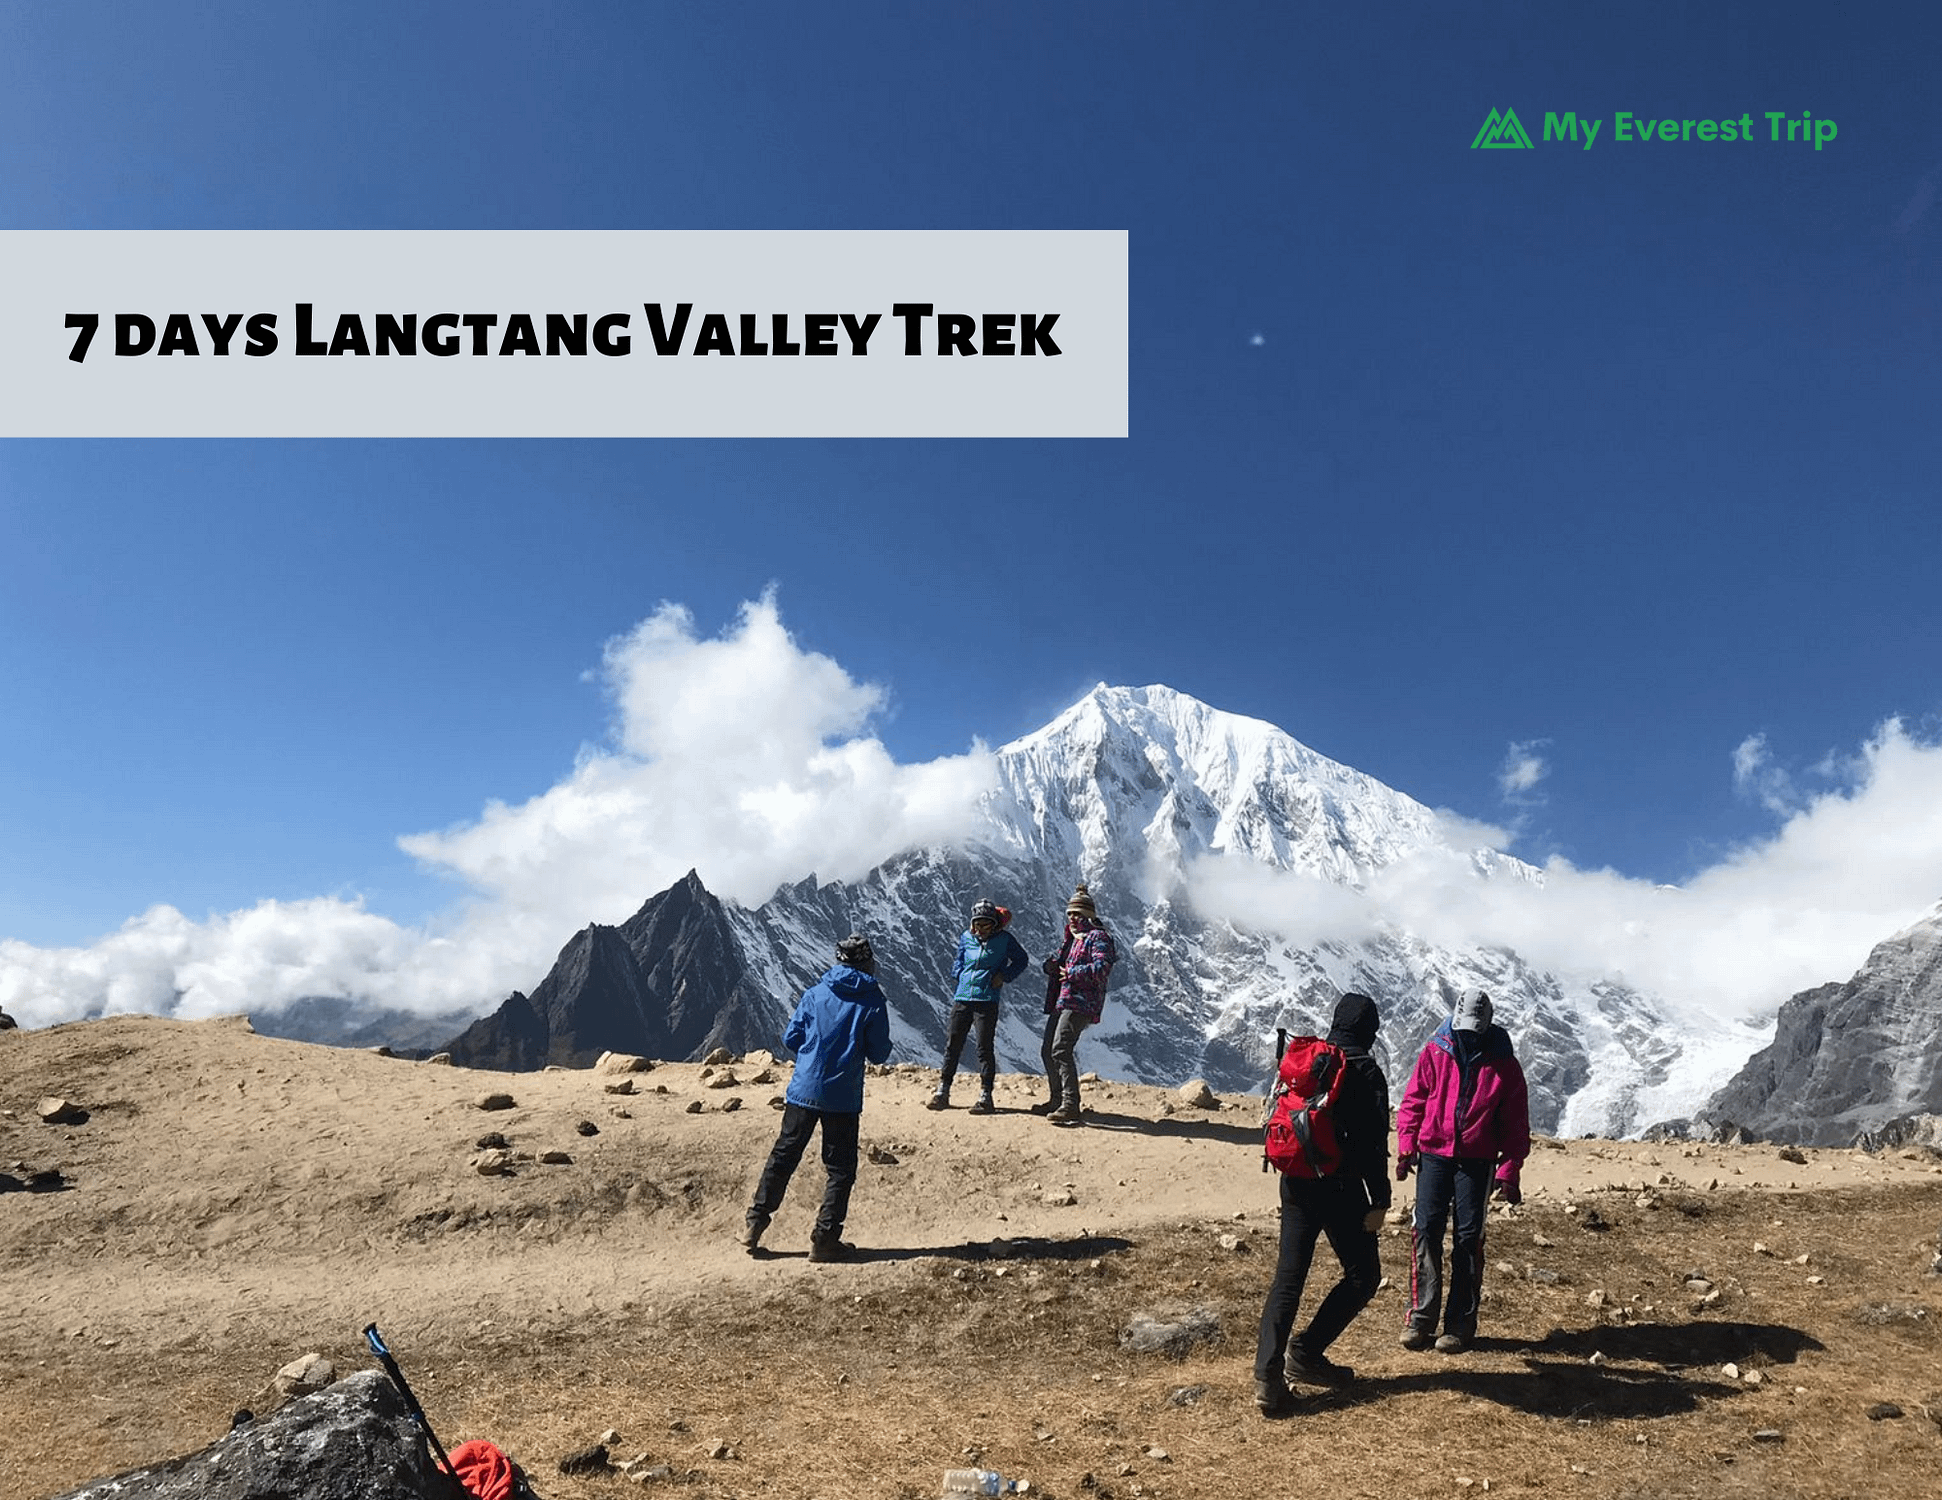 A complete guide on 7 days Langtang valley trek